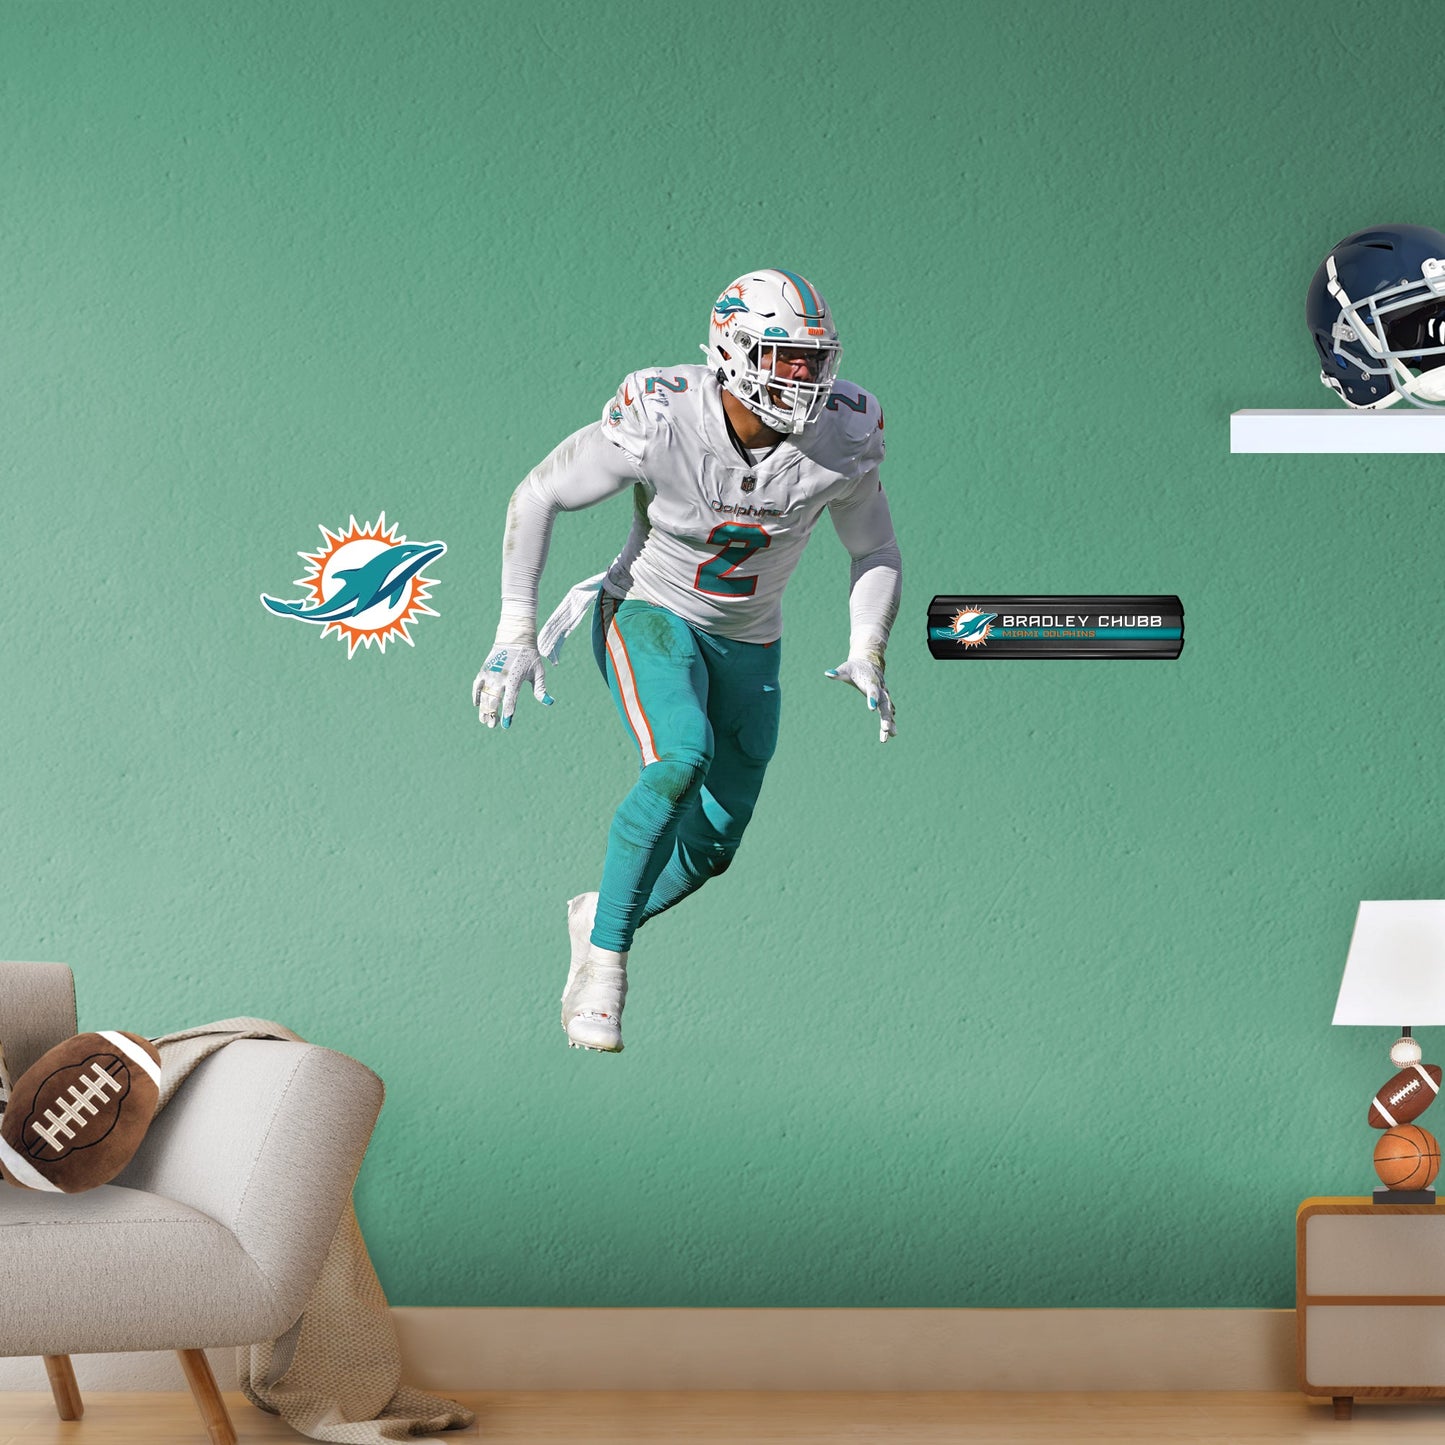 Miami Dolphins: Bradley Chubb - Officially Licensed NFL Removable Adhesive Decal